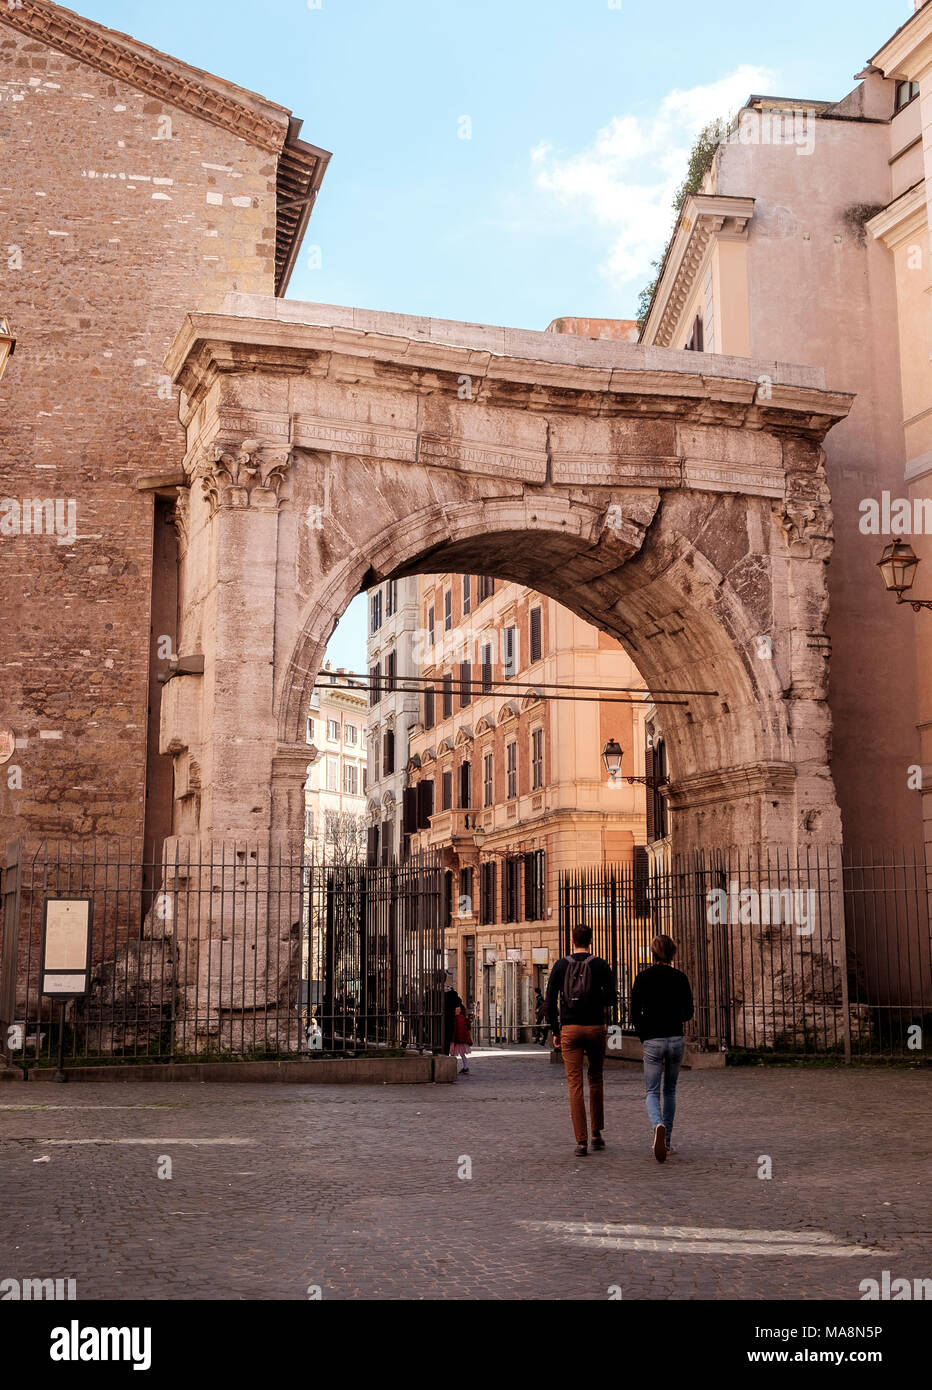 The Arco di Gallieno, Arch of Gallienus, Rome is crumbling but added strengthening holds it erect. Marking the start of the ancient Roman roads of  vi Stock Photo